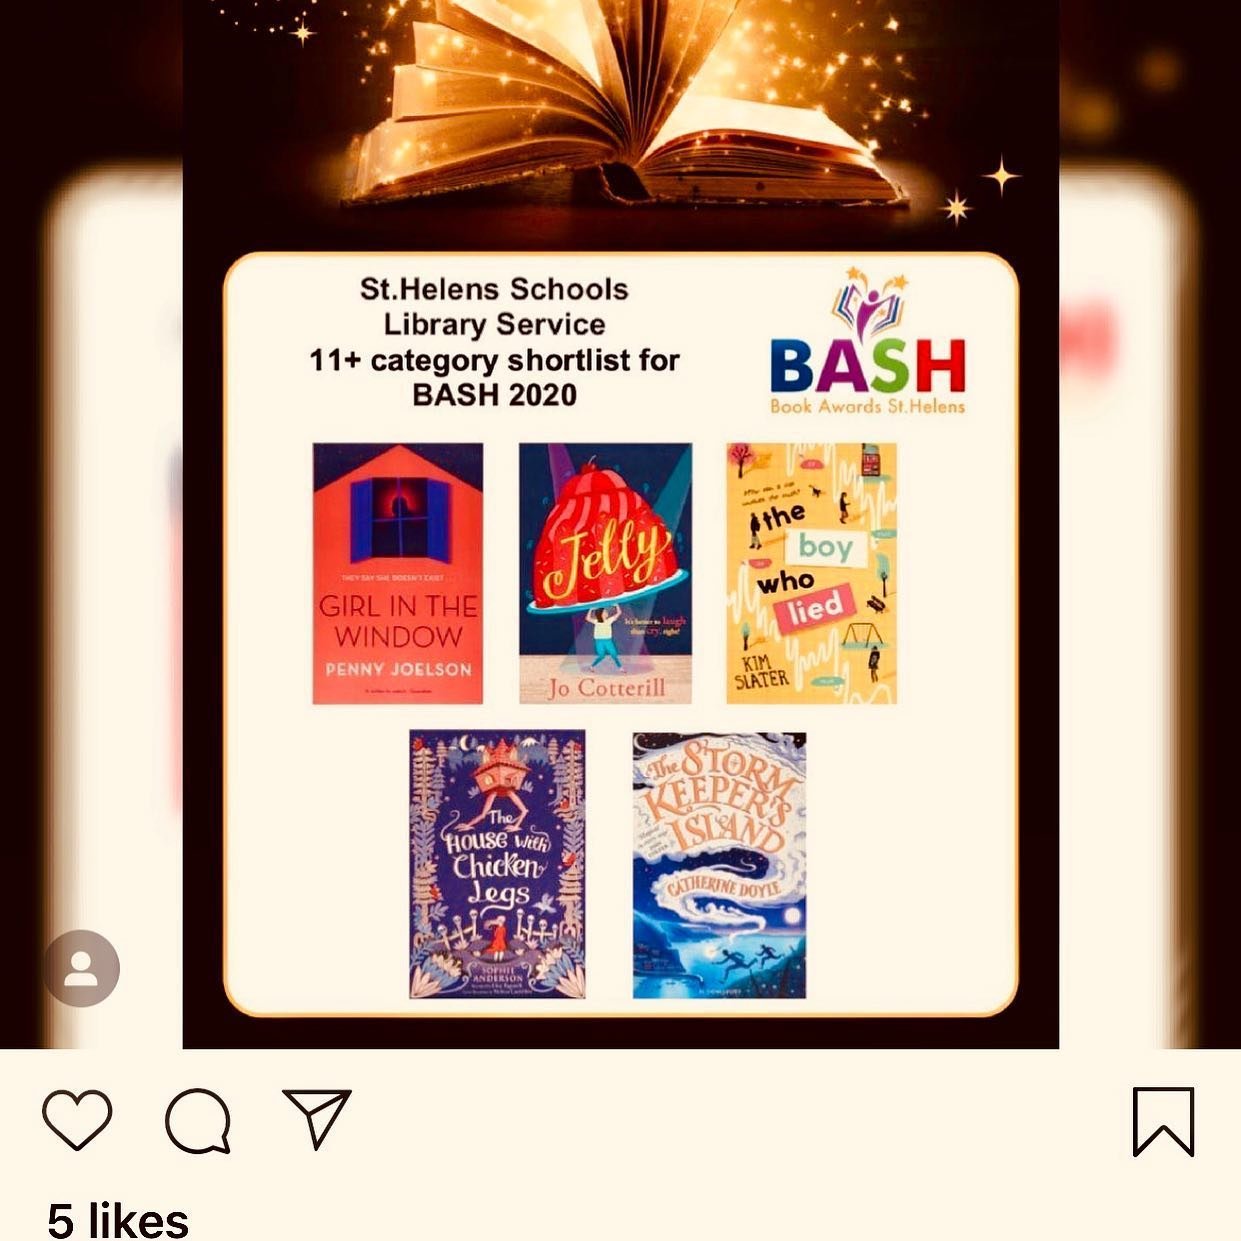 #Repost Watch video reviews of the shortlisted books inc #THEBOYWHOLIED on the St Helen&rsquo;s Libraries page! #BASH2020 @sthlibrariesandarts